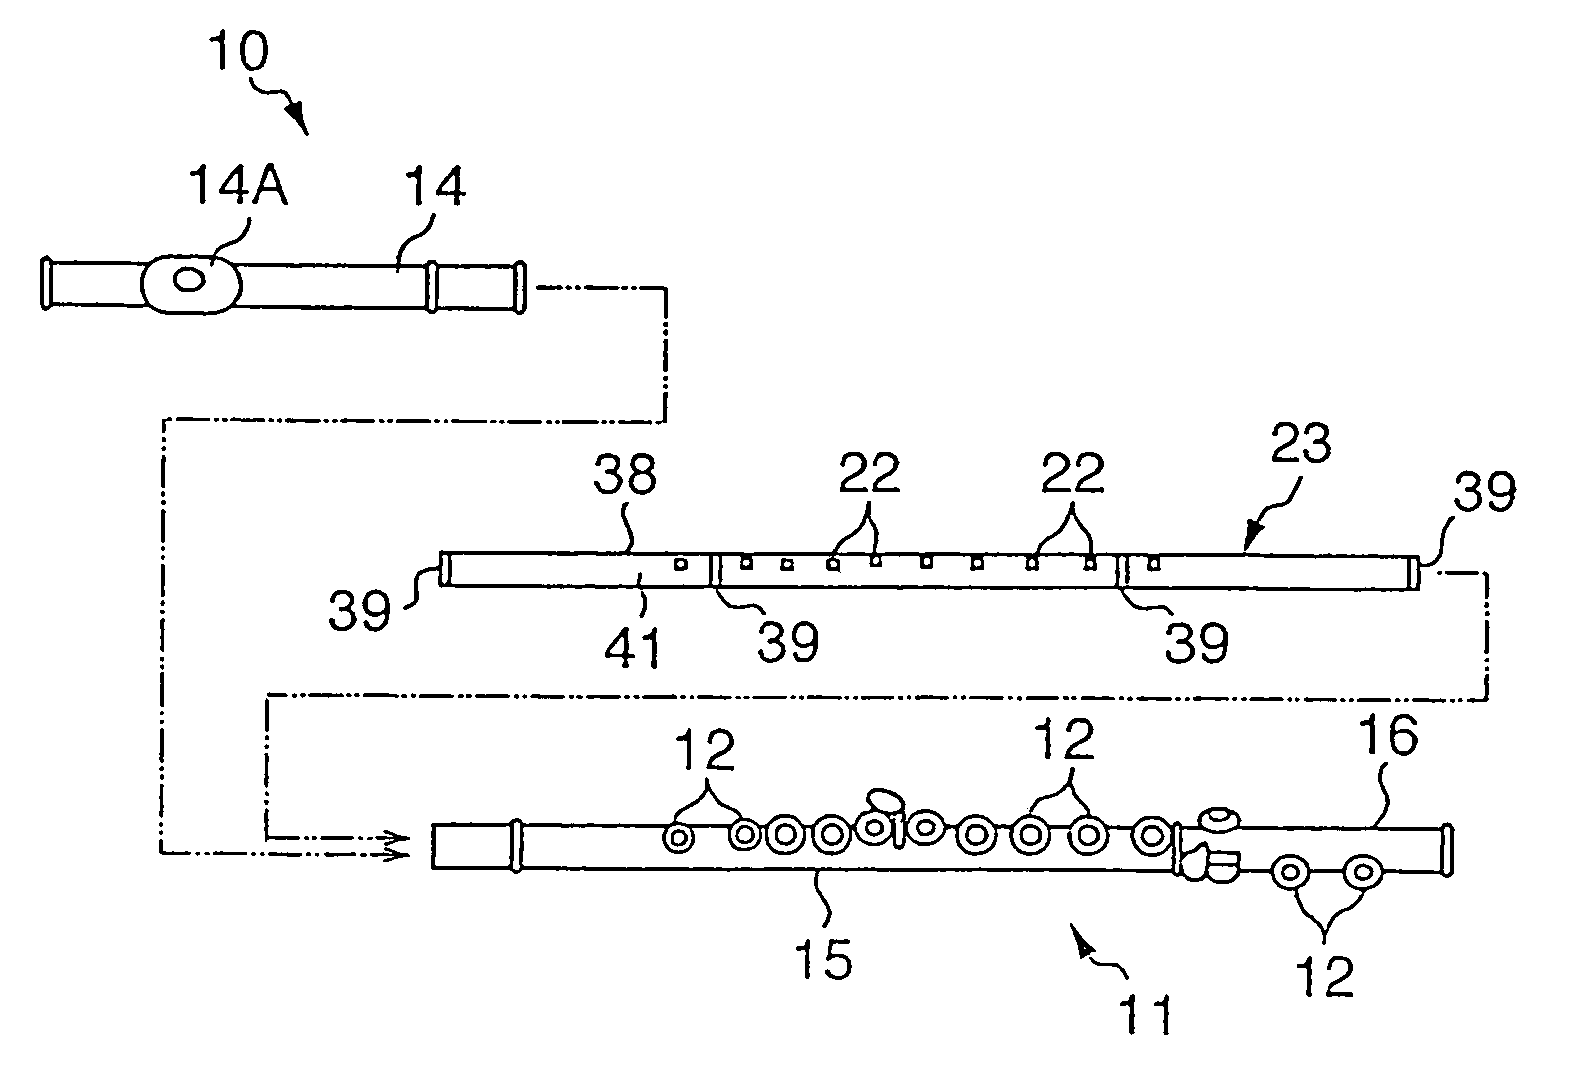 Electric wind instrument and key detection structure thereof